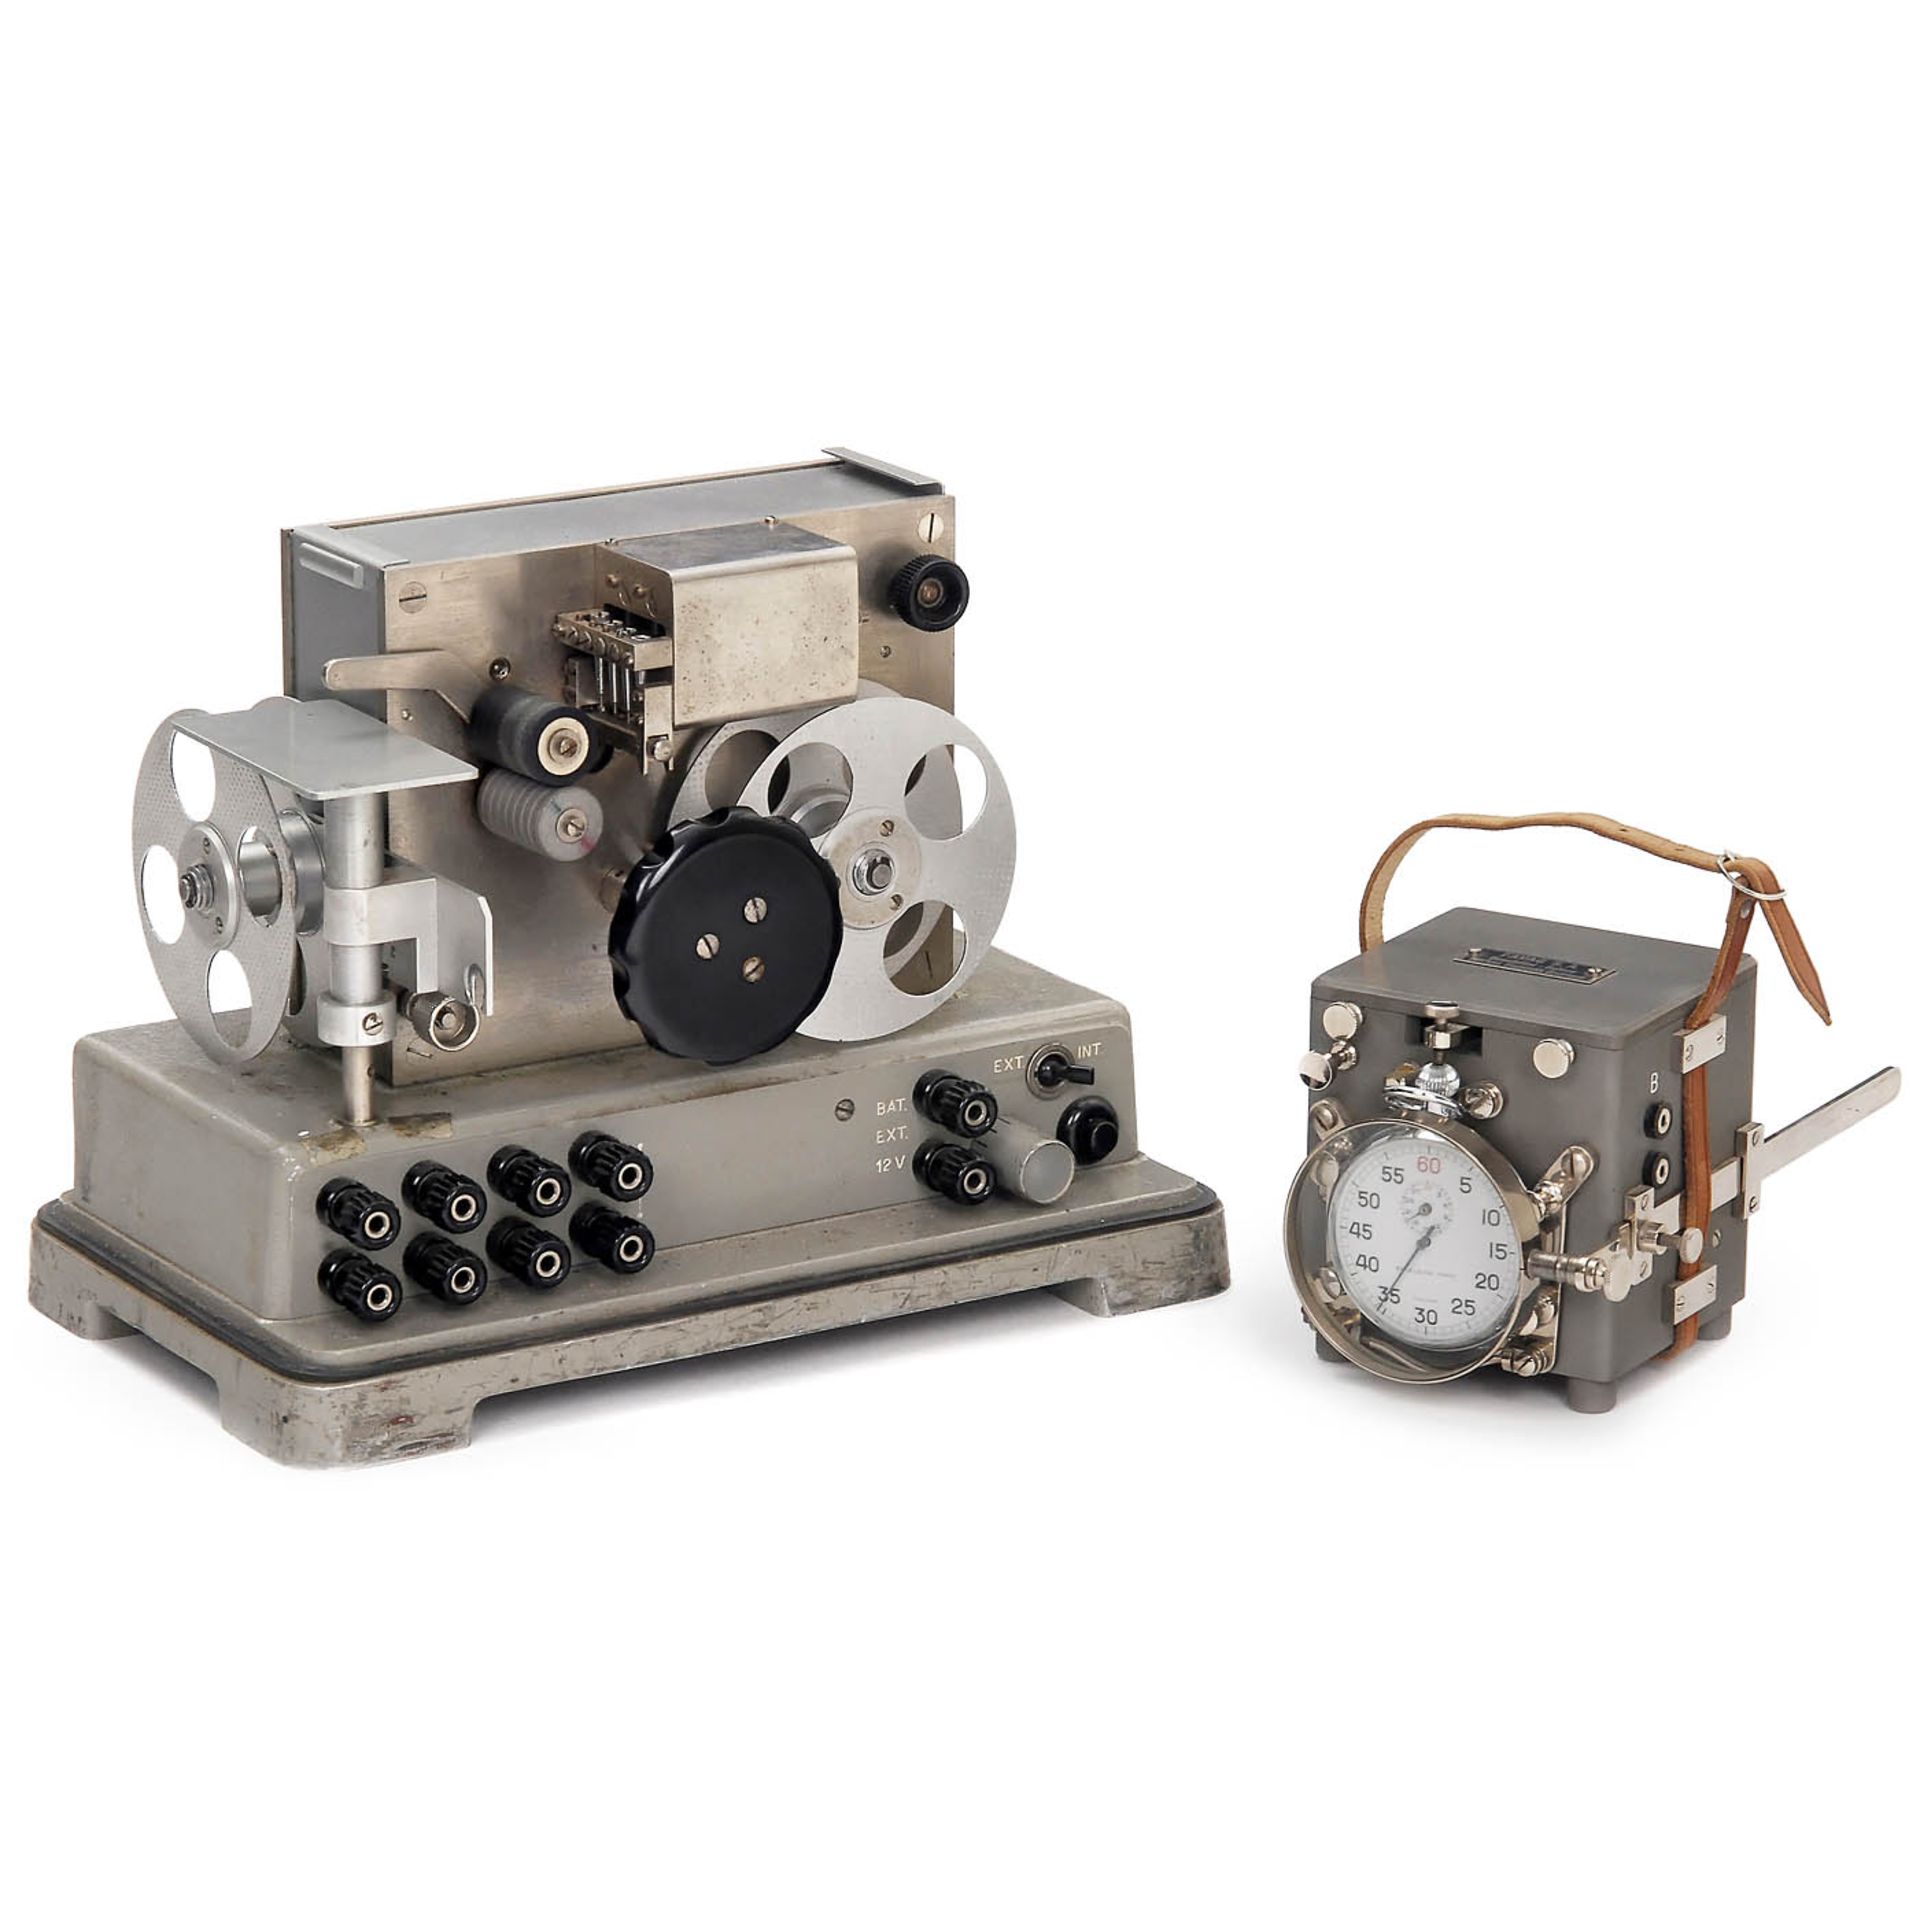 2 Swiss Precision Instruments by FAVAG, c. 1960 - Image 2 of 3